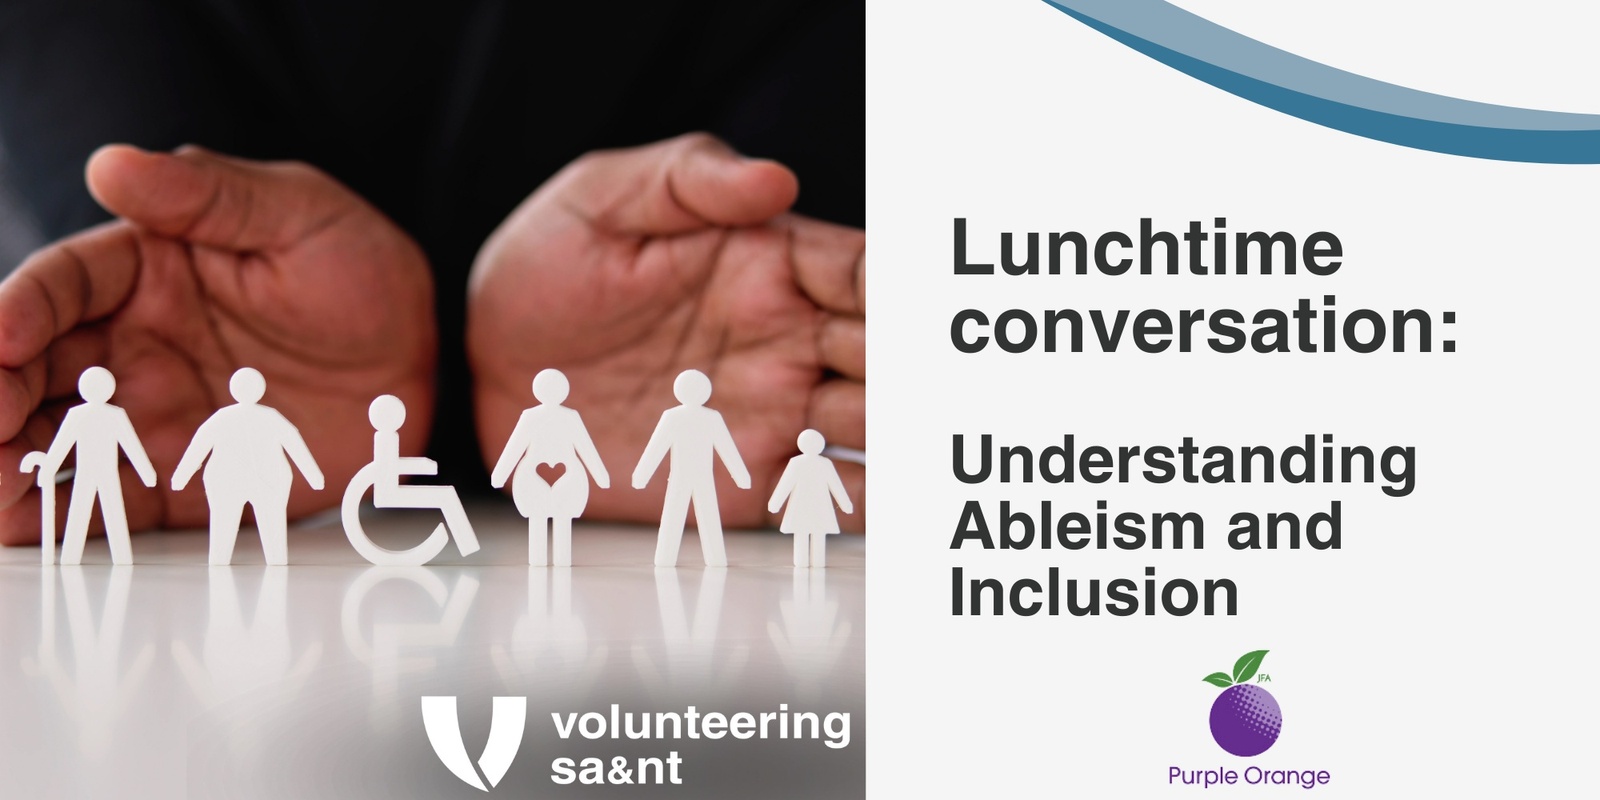 Banner image for Lunchtime conversation: Understanding Ableism and Inclusion